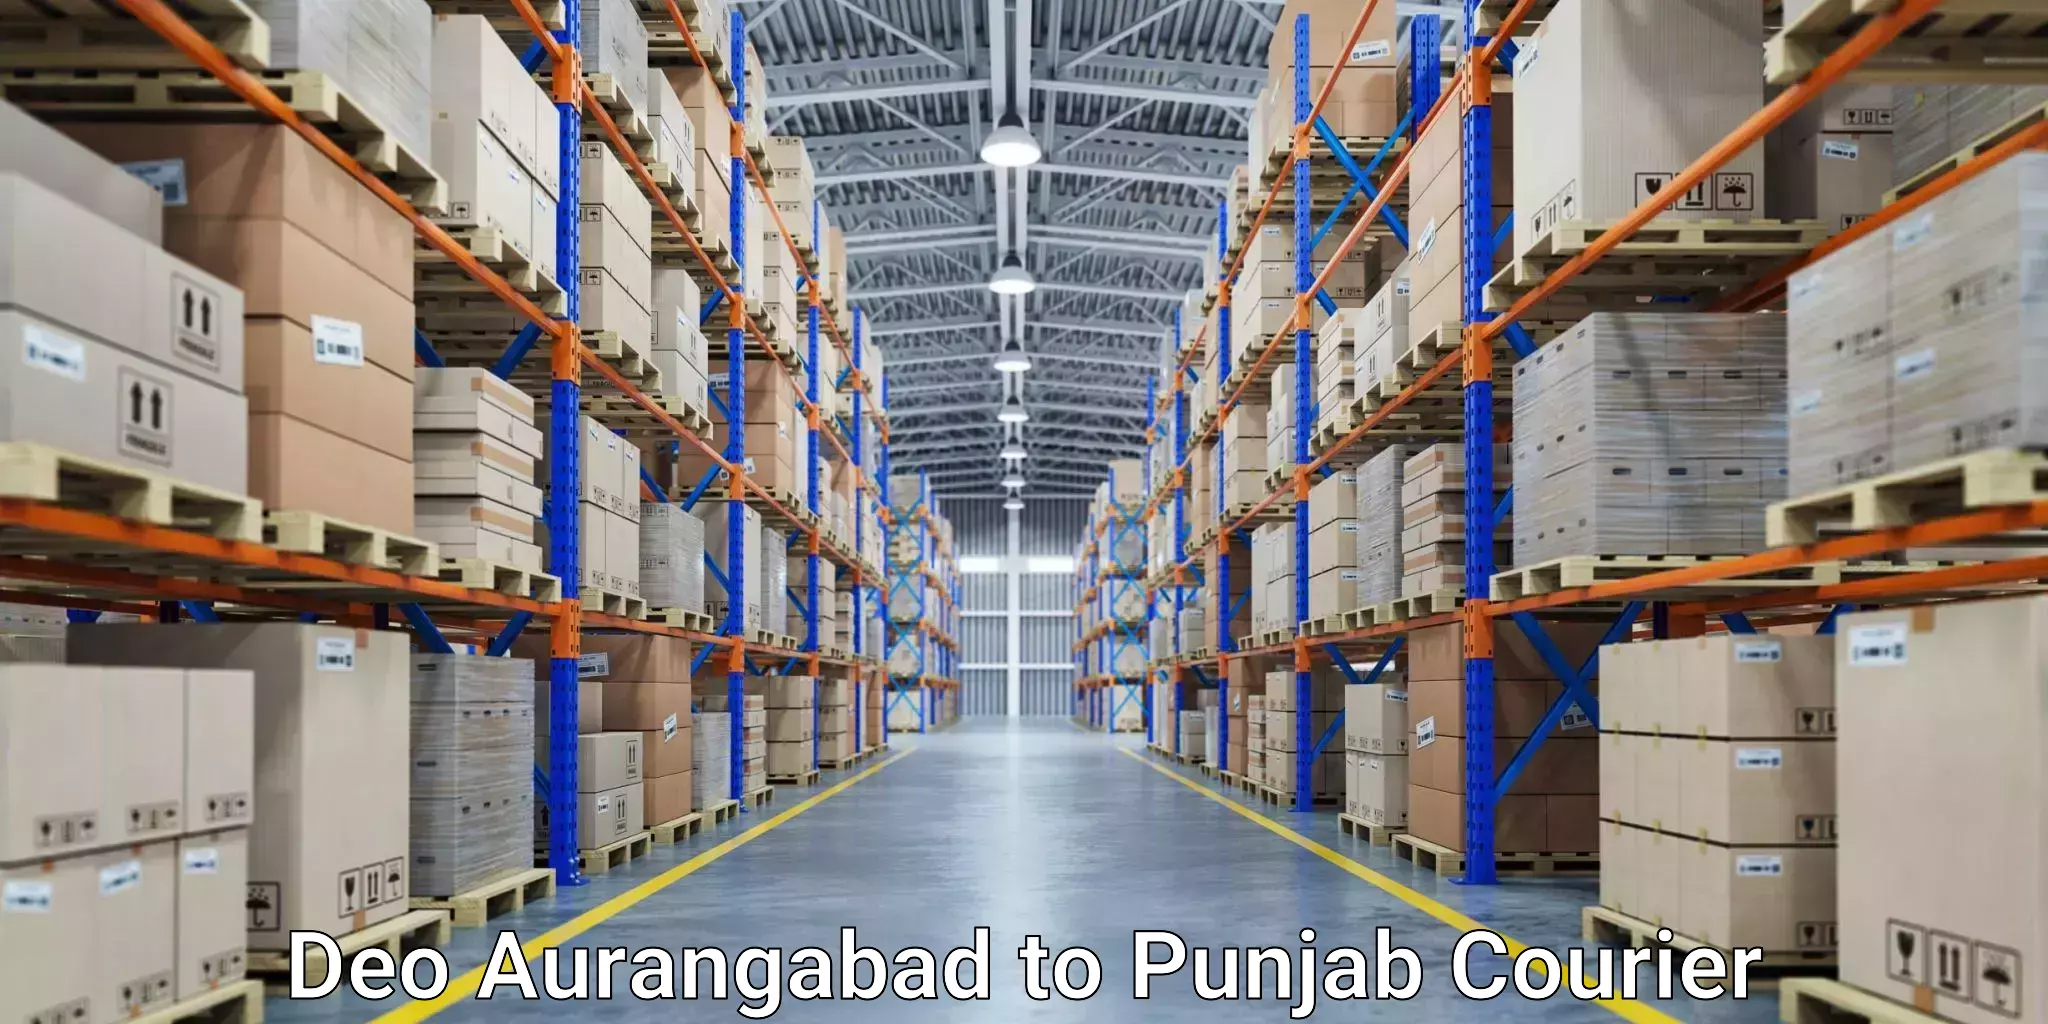 Rapid freight solutions Deo Aurangabad to Sultanpur Lodhi